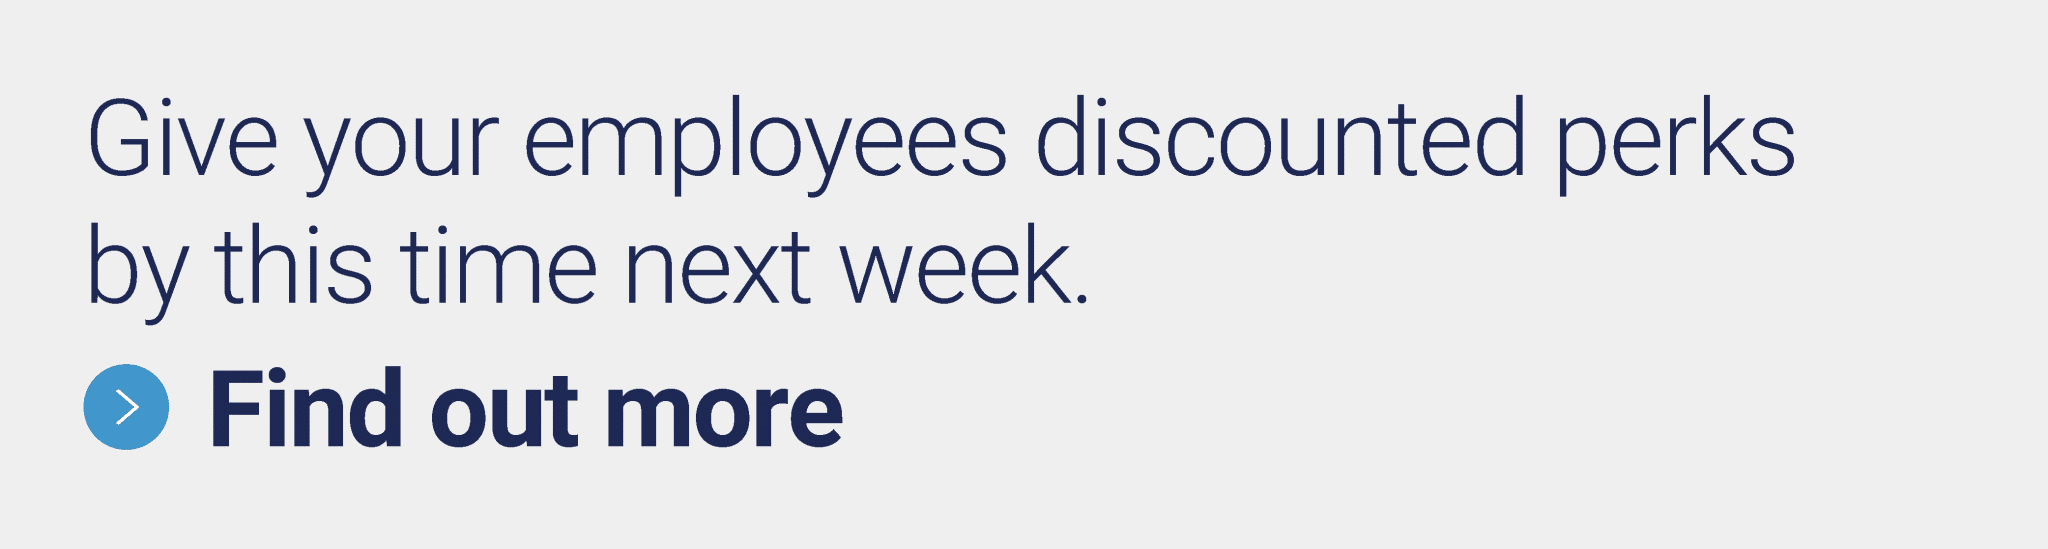 Give your employees discounted perks by this time next week. Find out more >